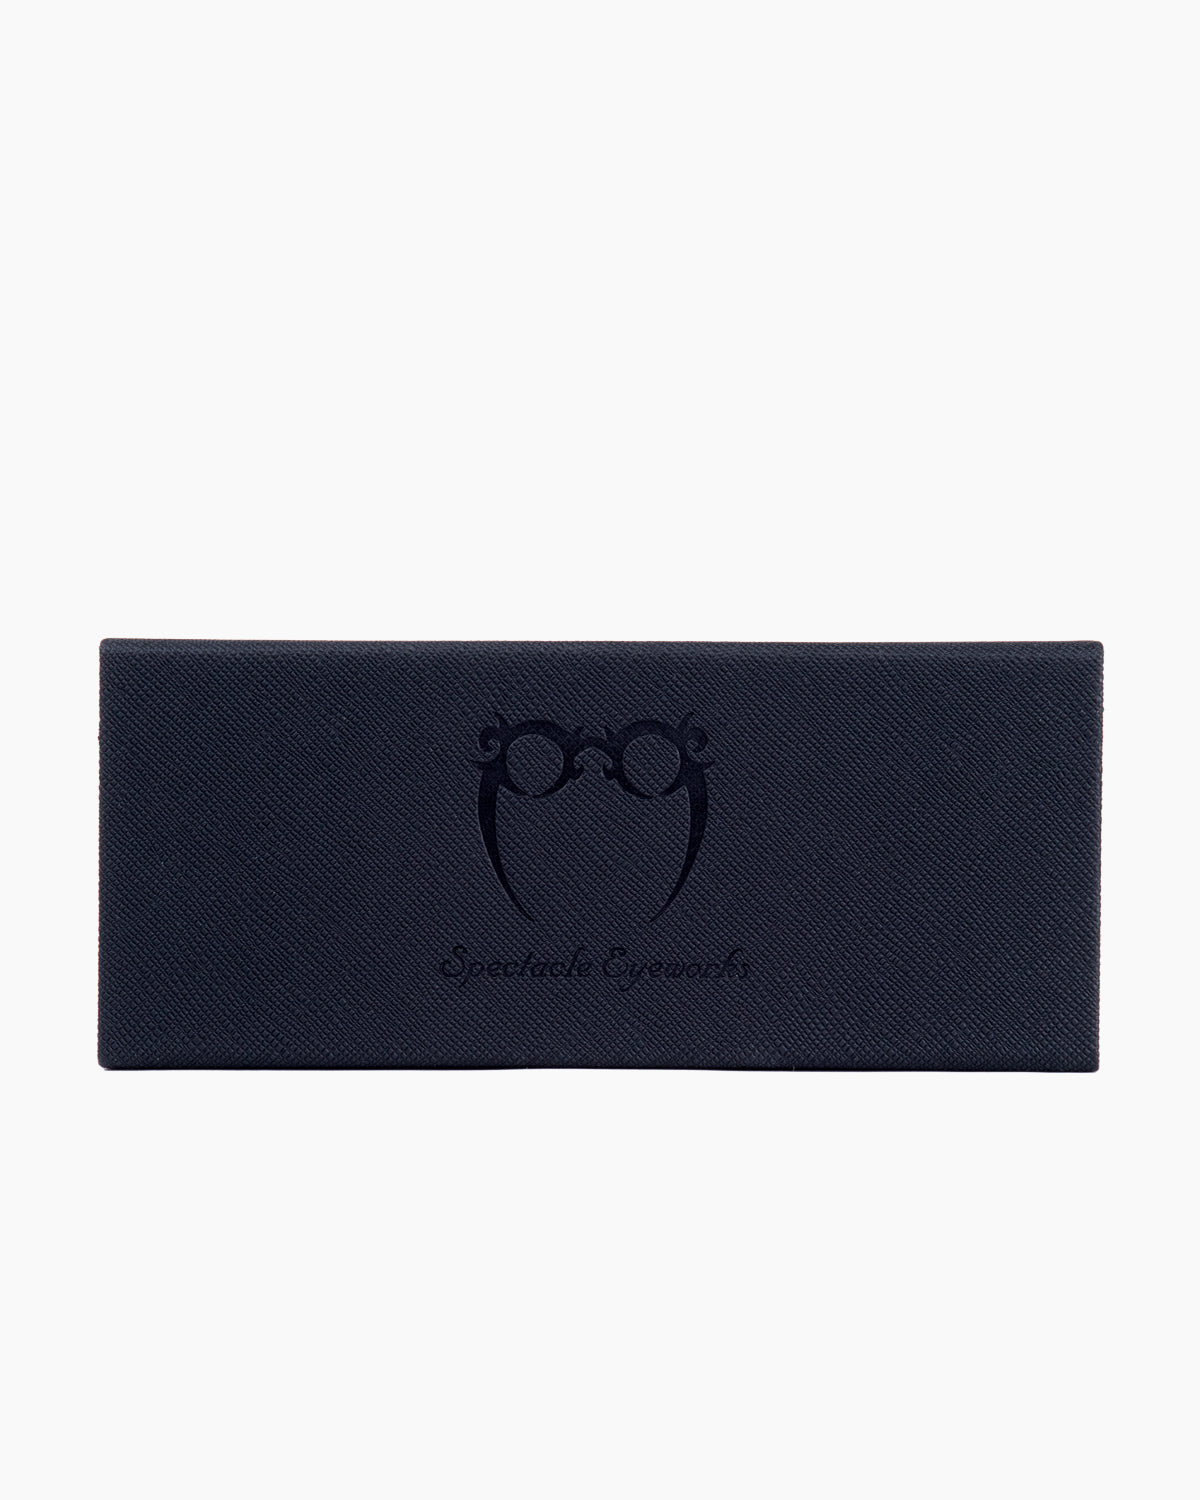 Spectacleeyeworks - Nada - c505LF | Bar à lunettes:  Marie-Sophie Dion